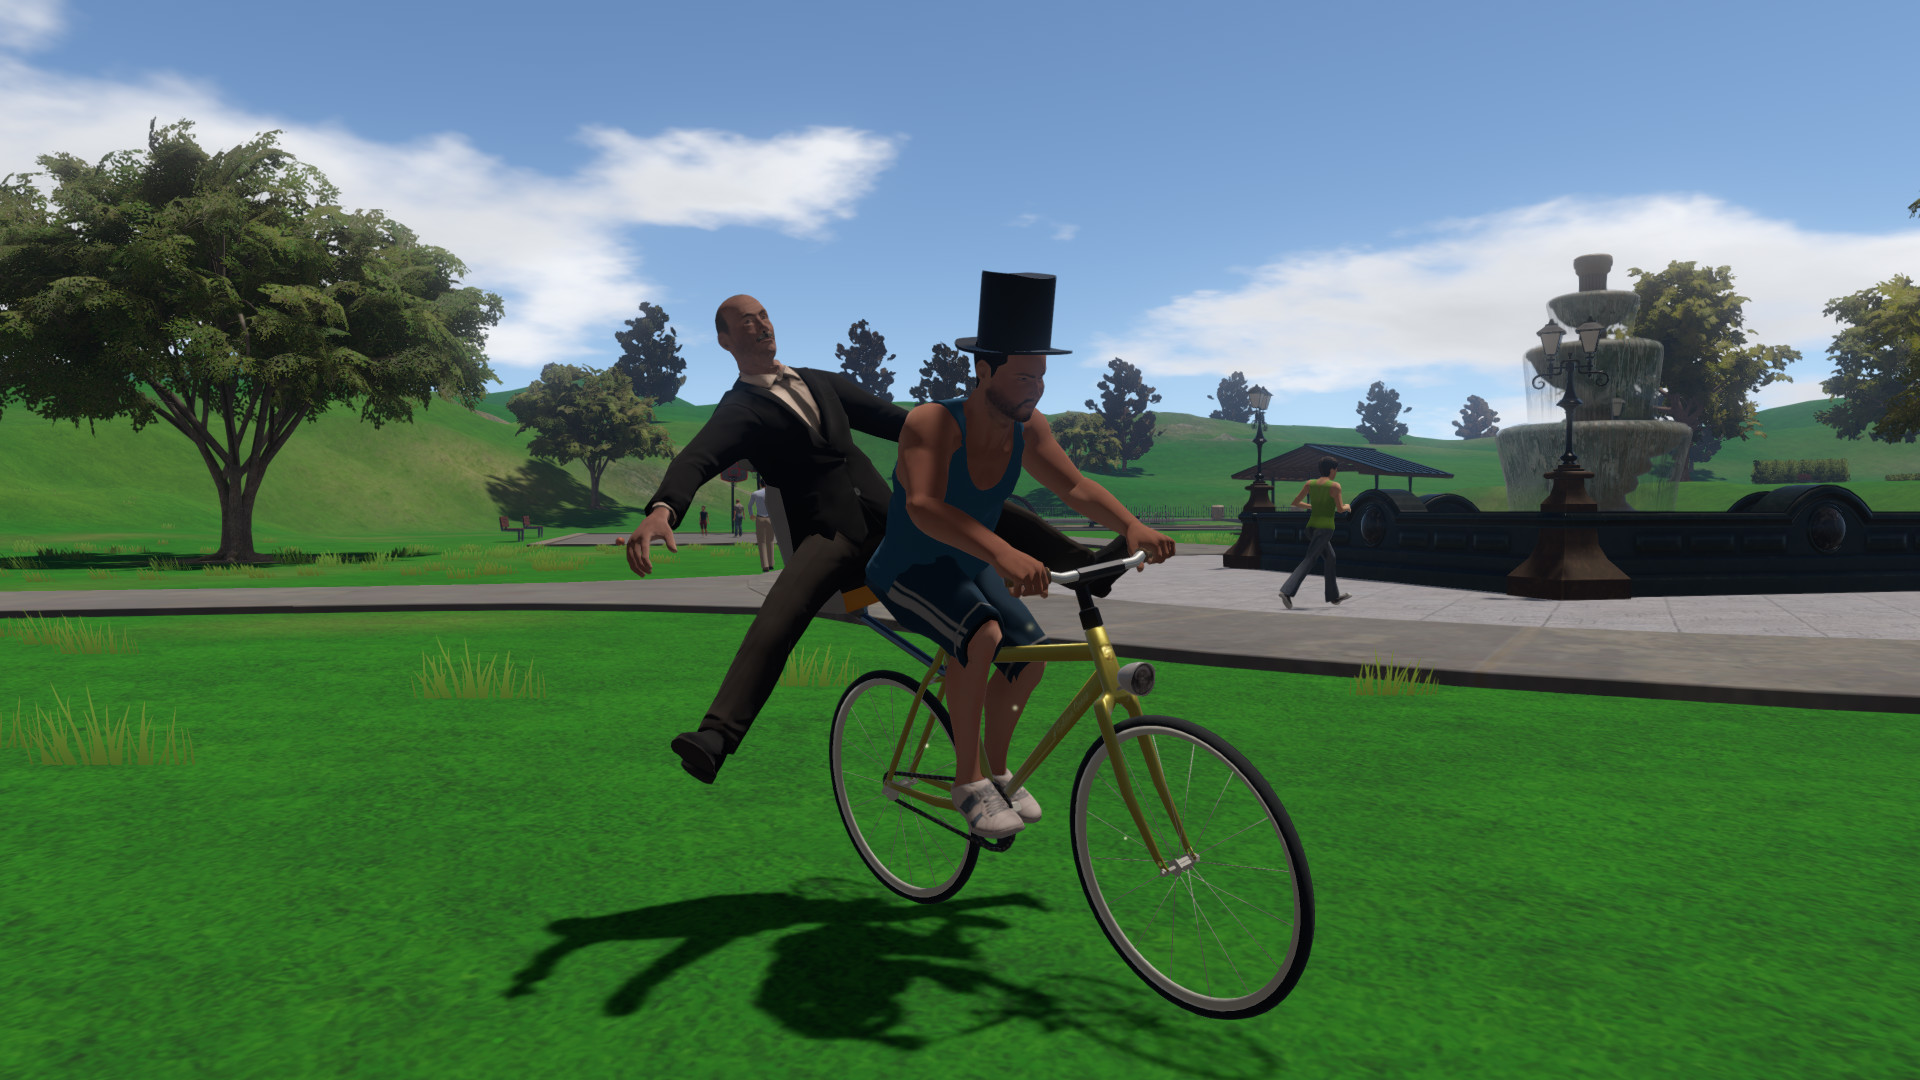 3D HAPPY WHEELS: Meet The Yang Family! - Guts and Glory Available on Steam  Now! 